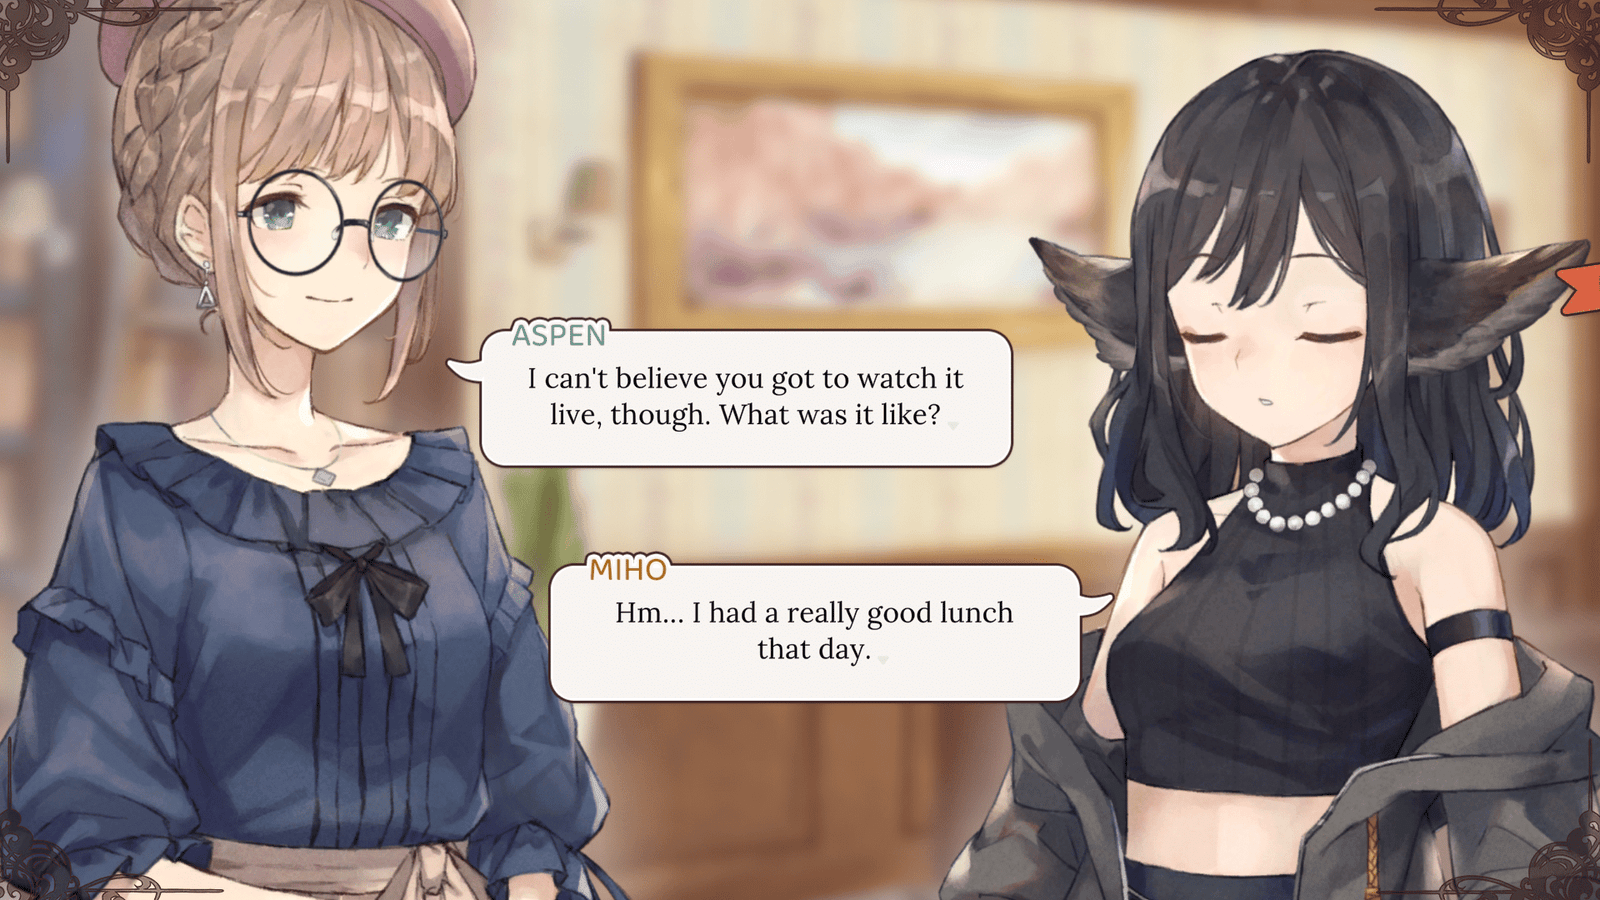 In the visual novel please be happy, two women are speaking with each other. The one on the left says "i can't believe you got to watch it live, though. What was it like?". The other replies "Hm... I had a really good lunch that day."